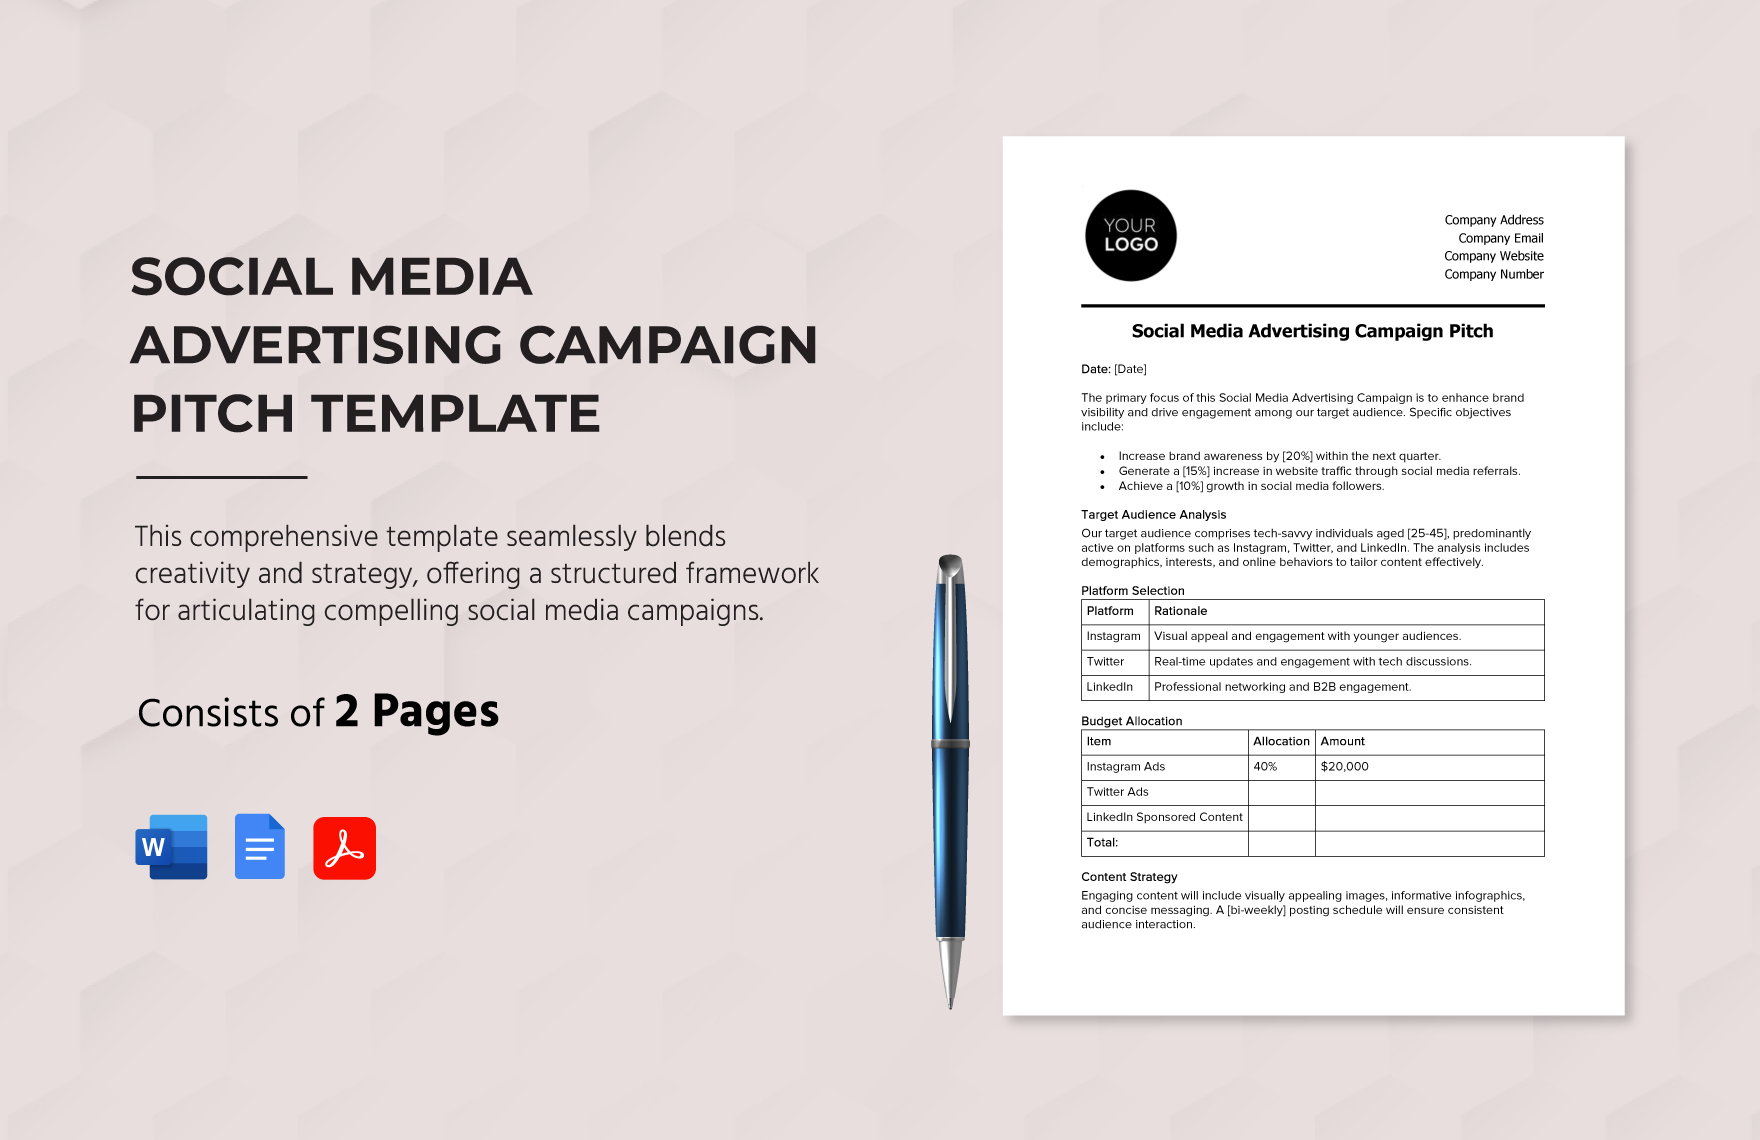 Social Media Advertising Campaign Pitch Template in Word, Google Docs, PDF